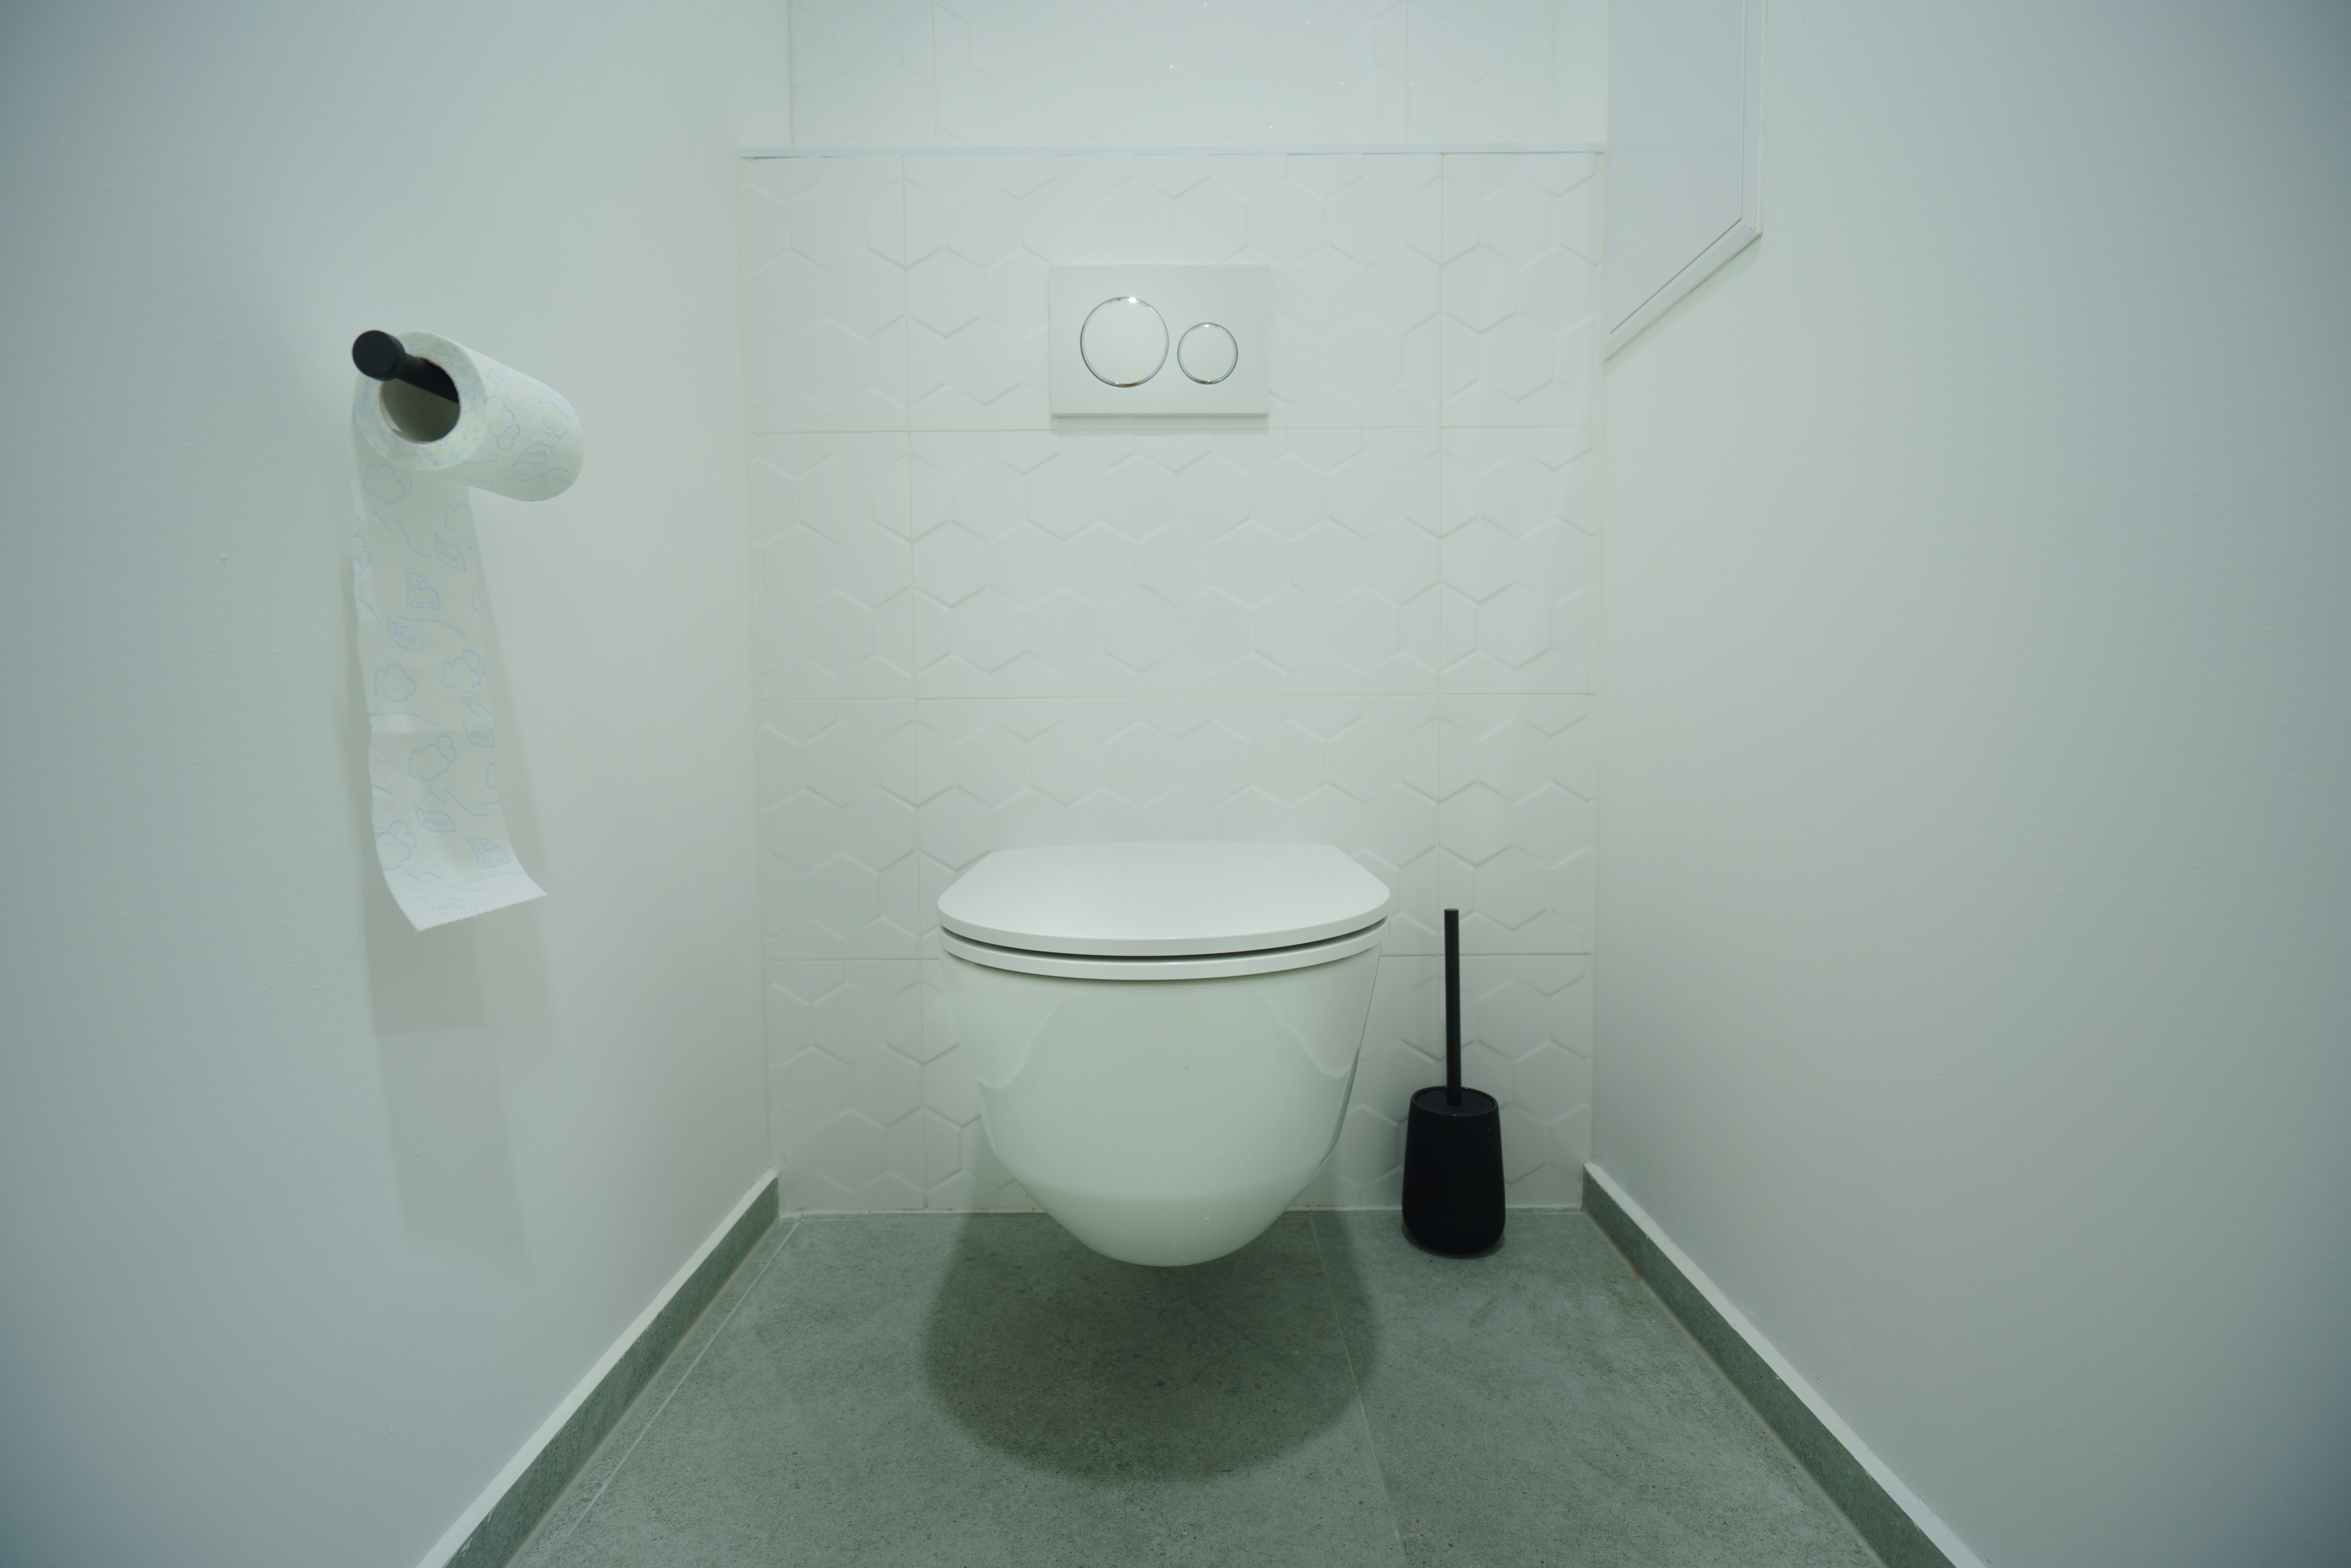 A modern toilet with a wall-mounted paper roll and a brush cleaner on the side